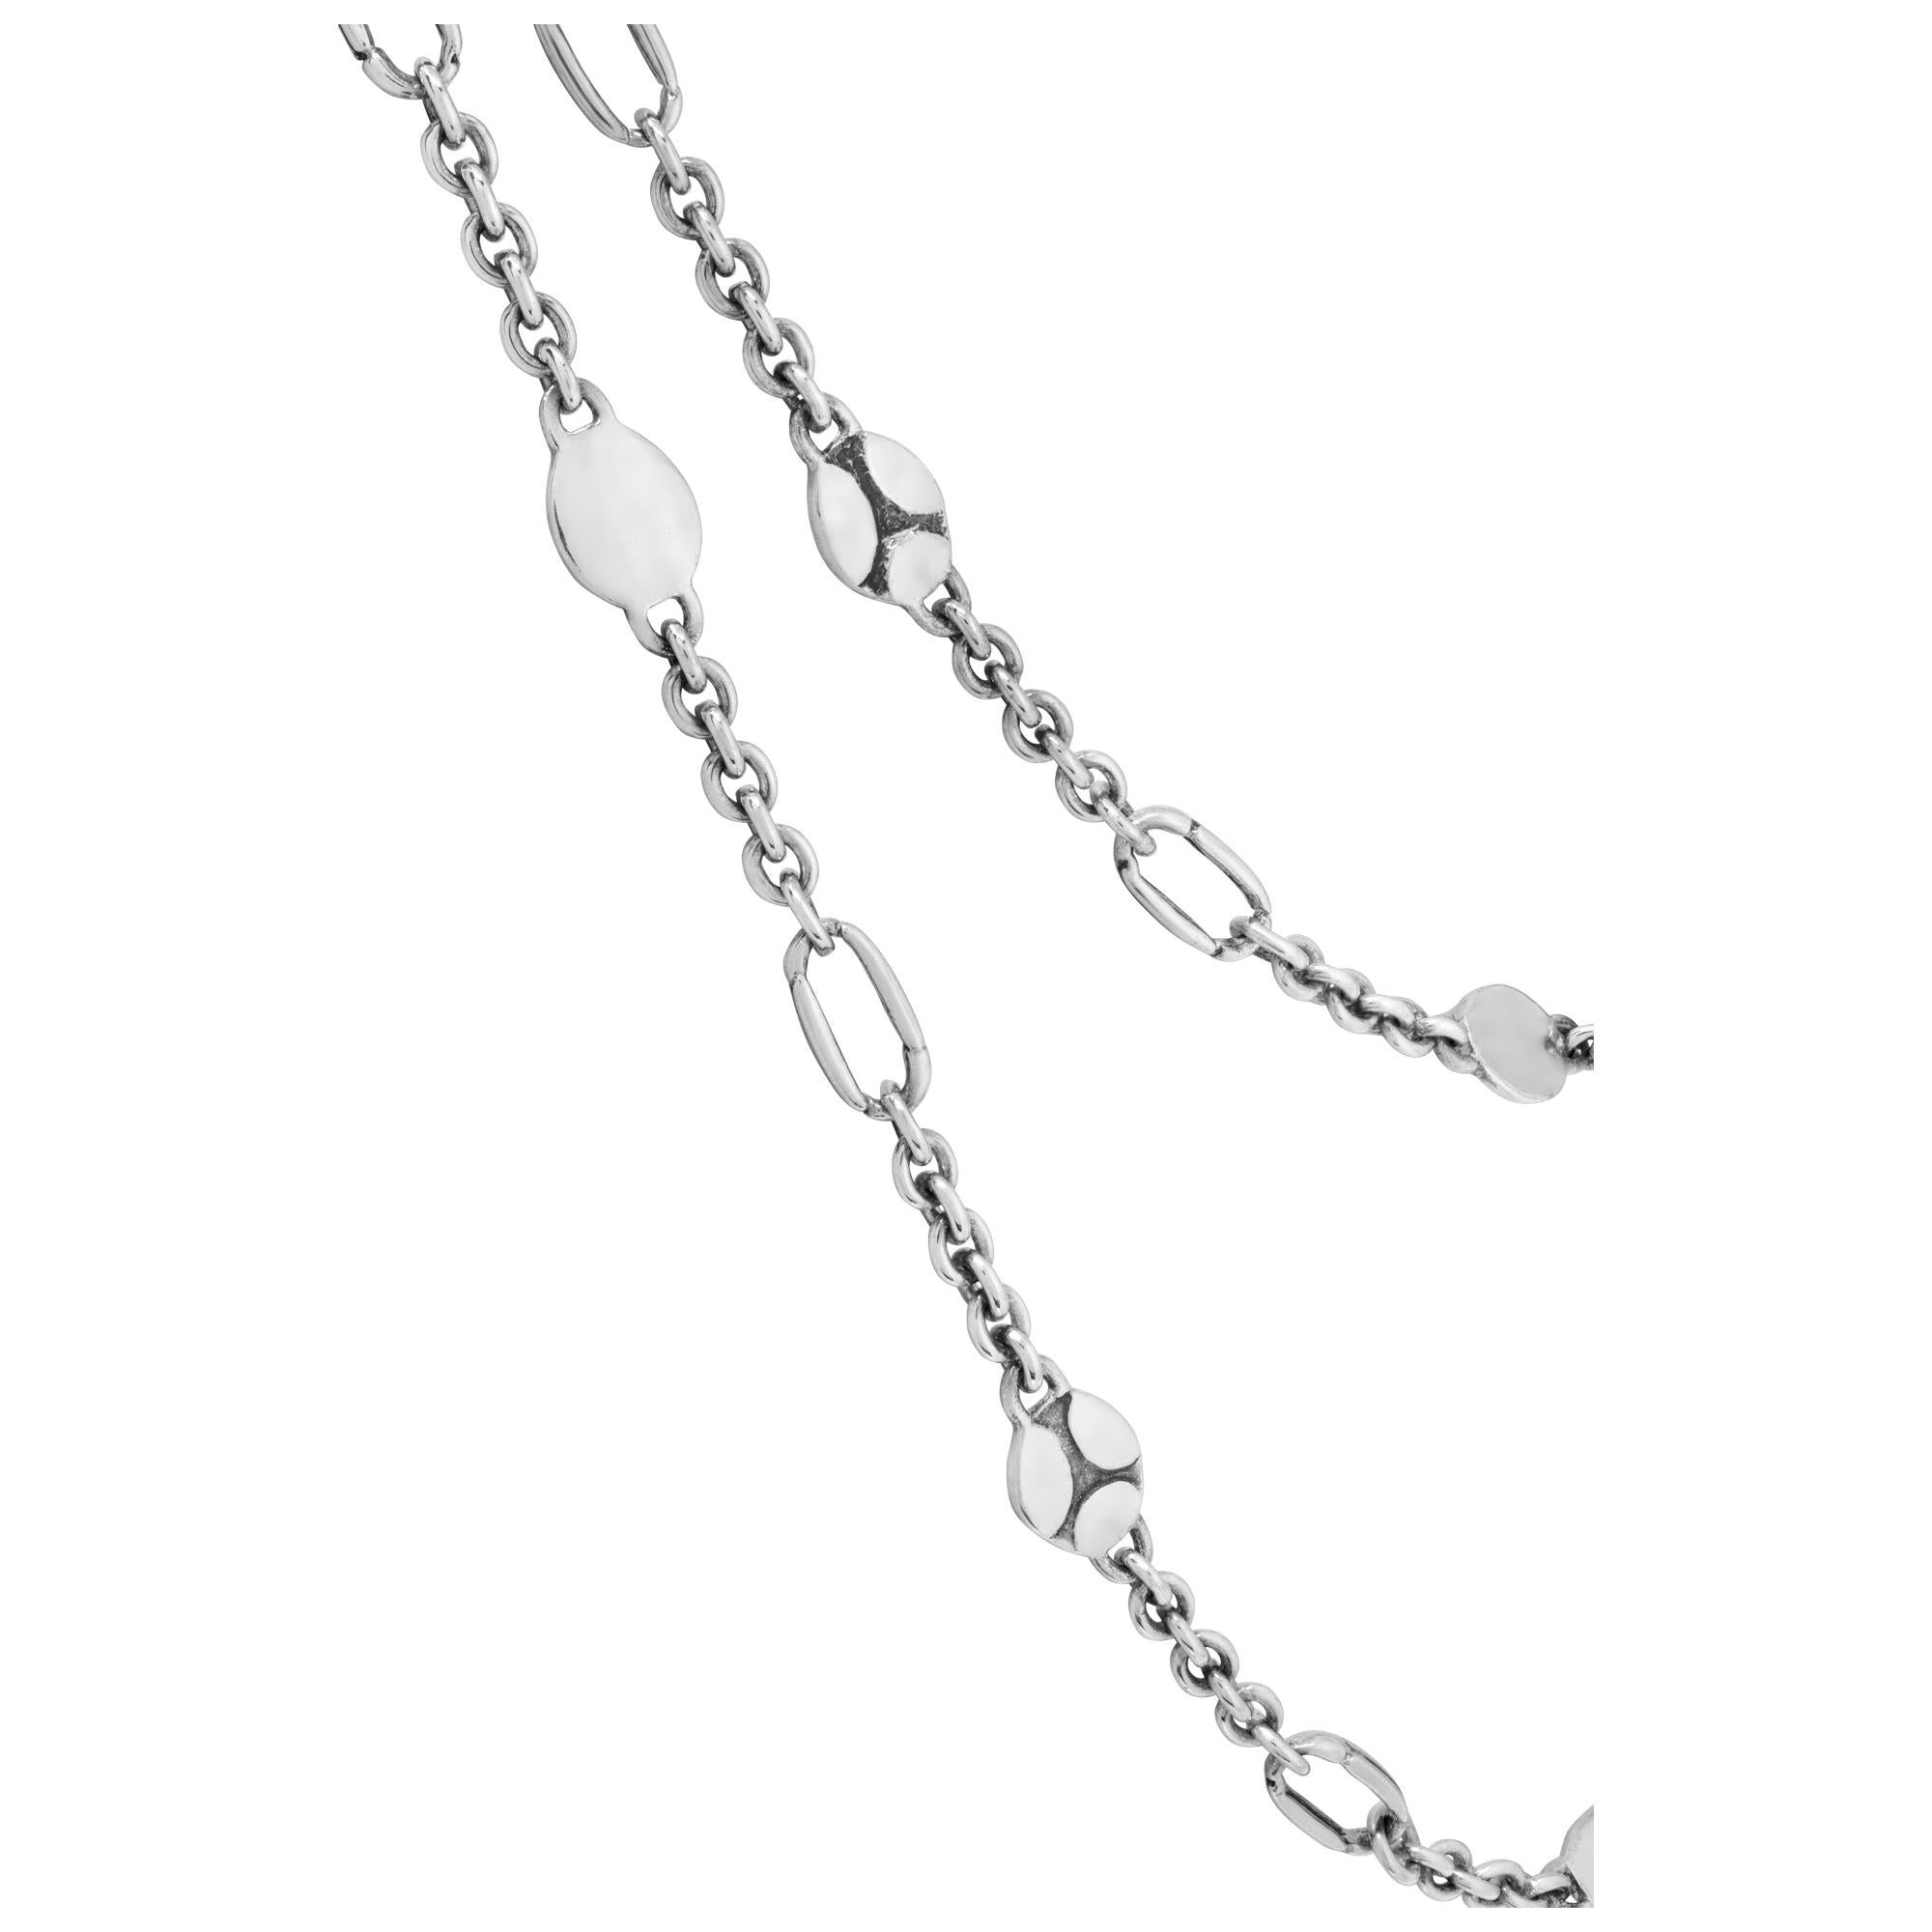 John Hardy Koli Collection Sterling Silver Chain In Excellent Condition For Sale In Surfside, FL